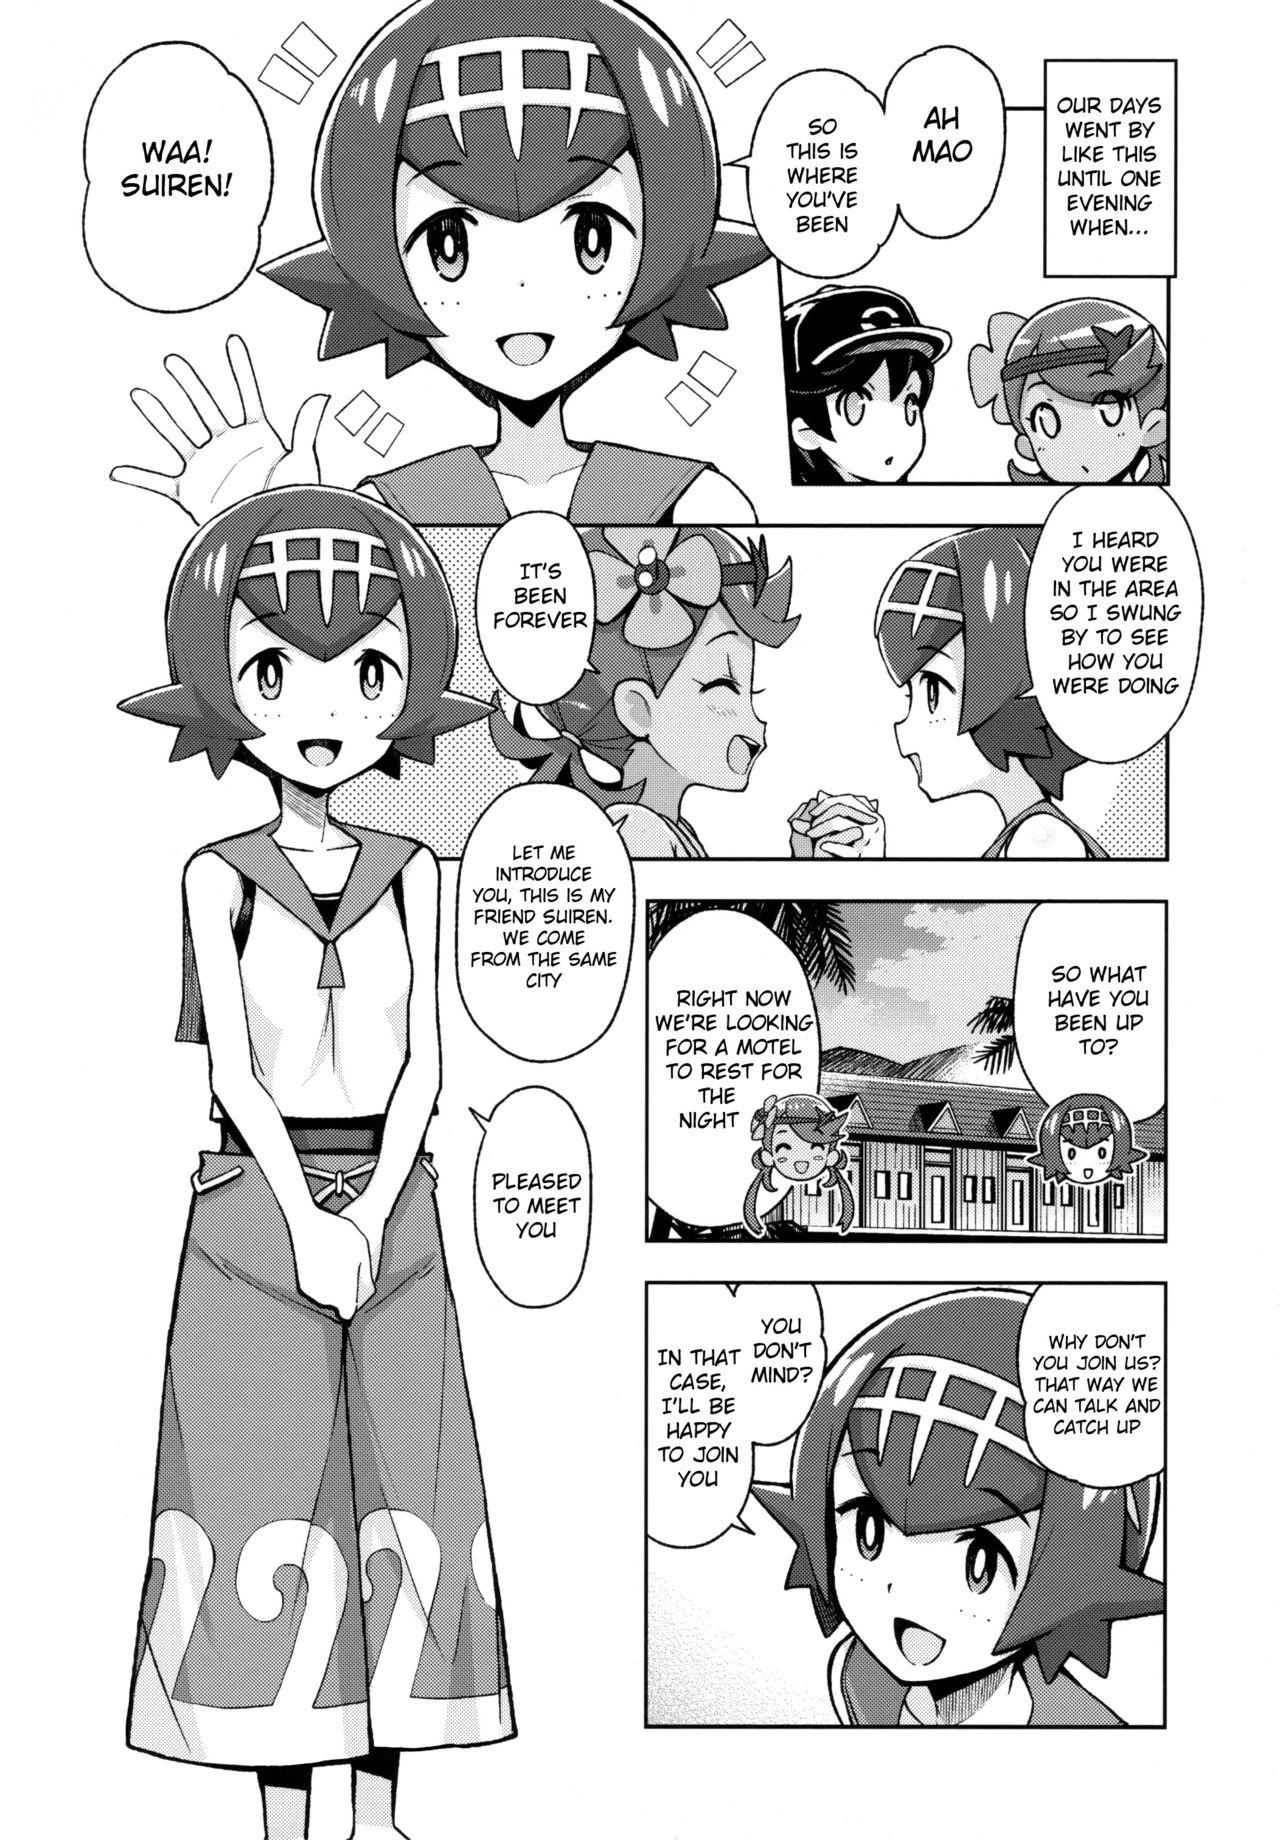 Group MAO FRIENDS2 - Pokemon | pocket monsters Fodendo - Page 3